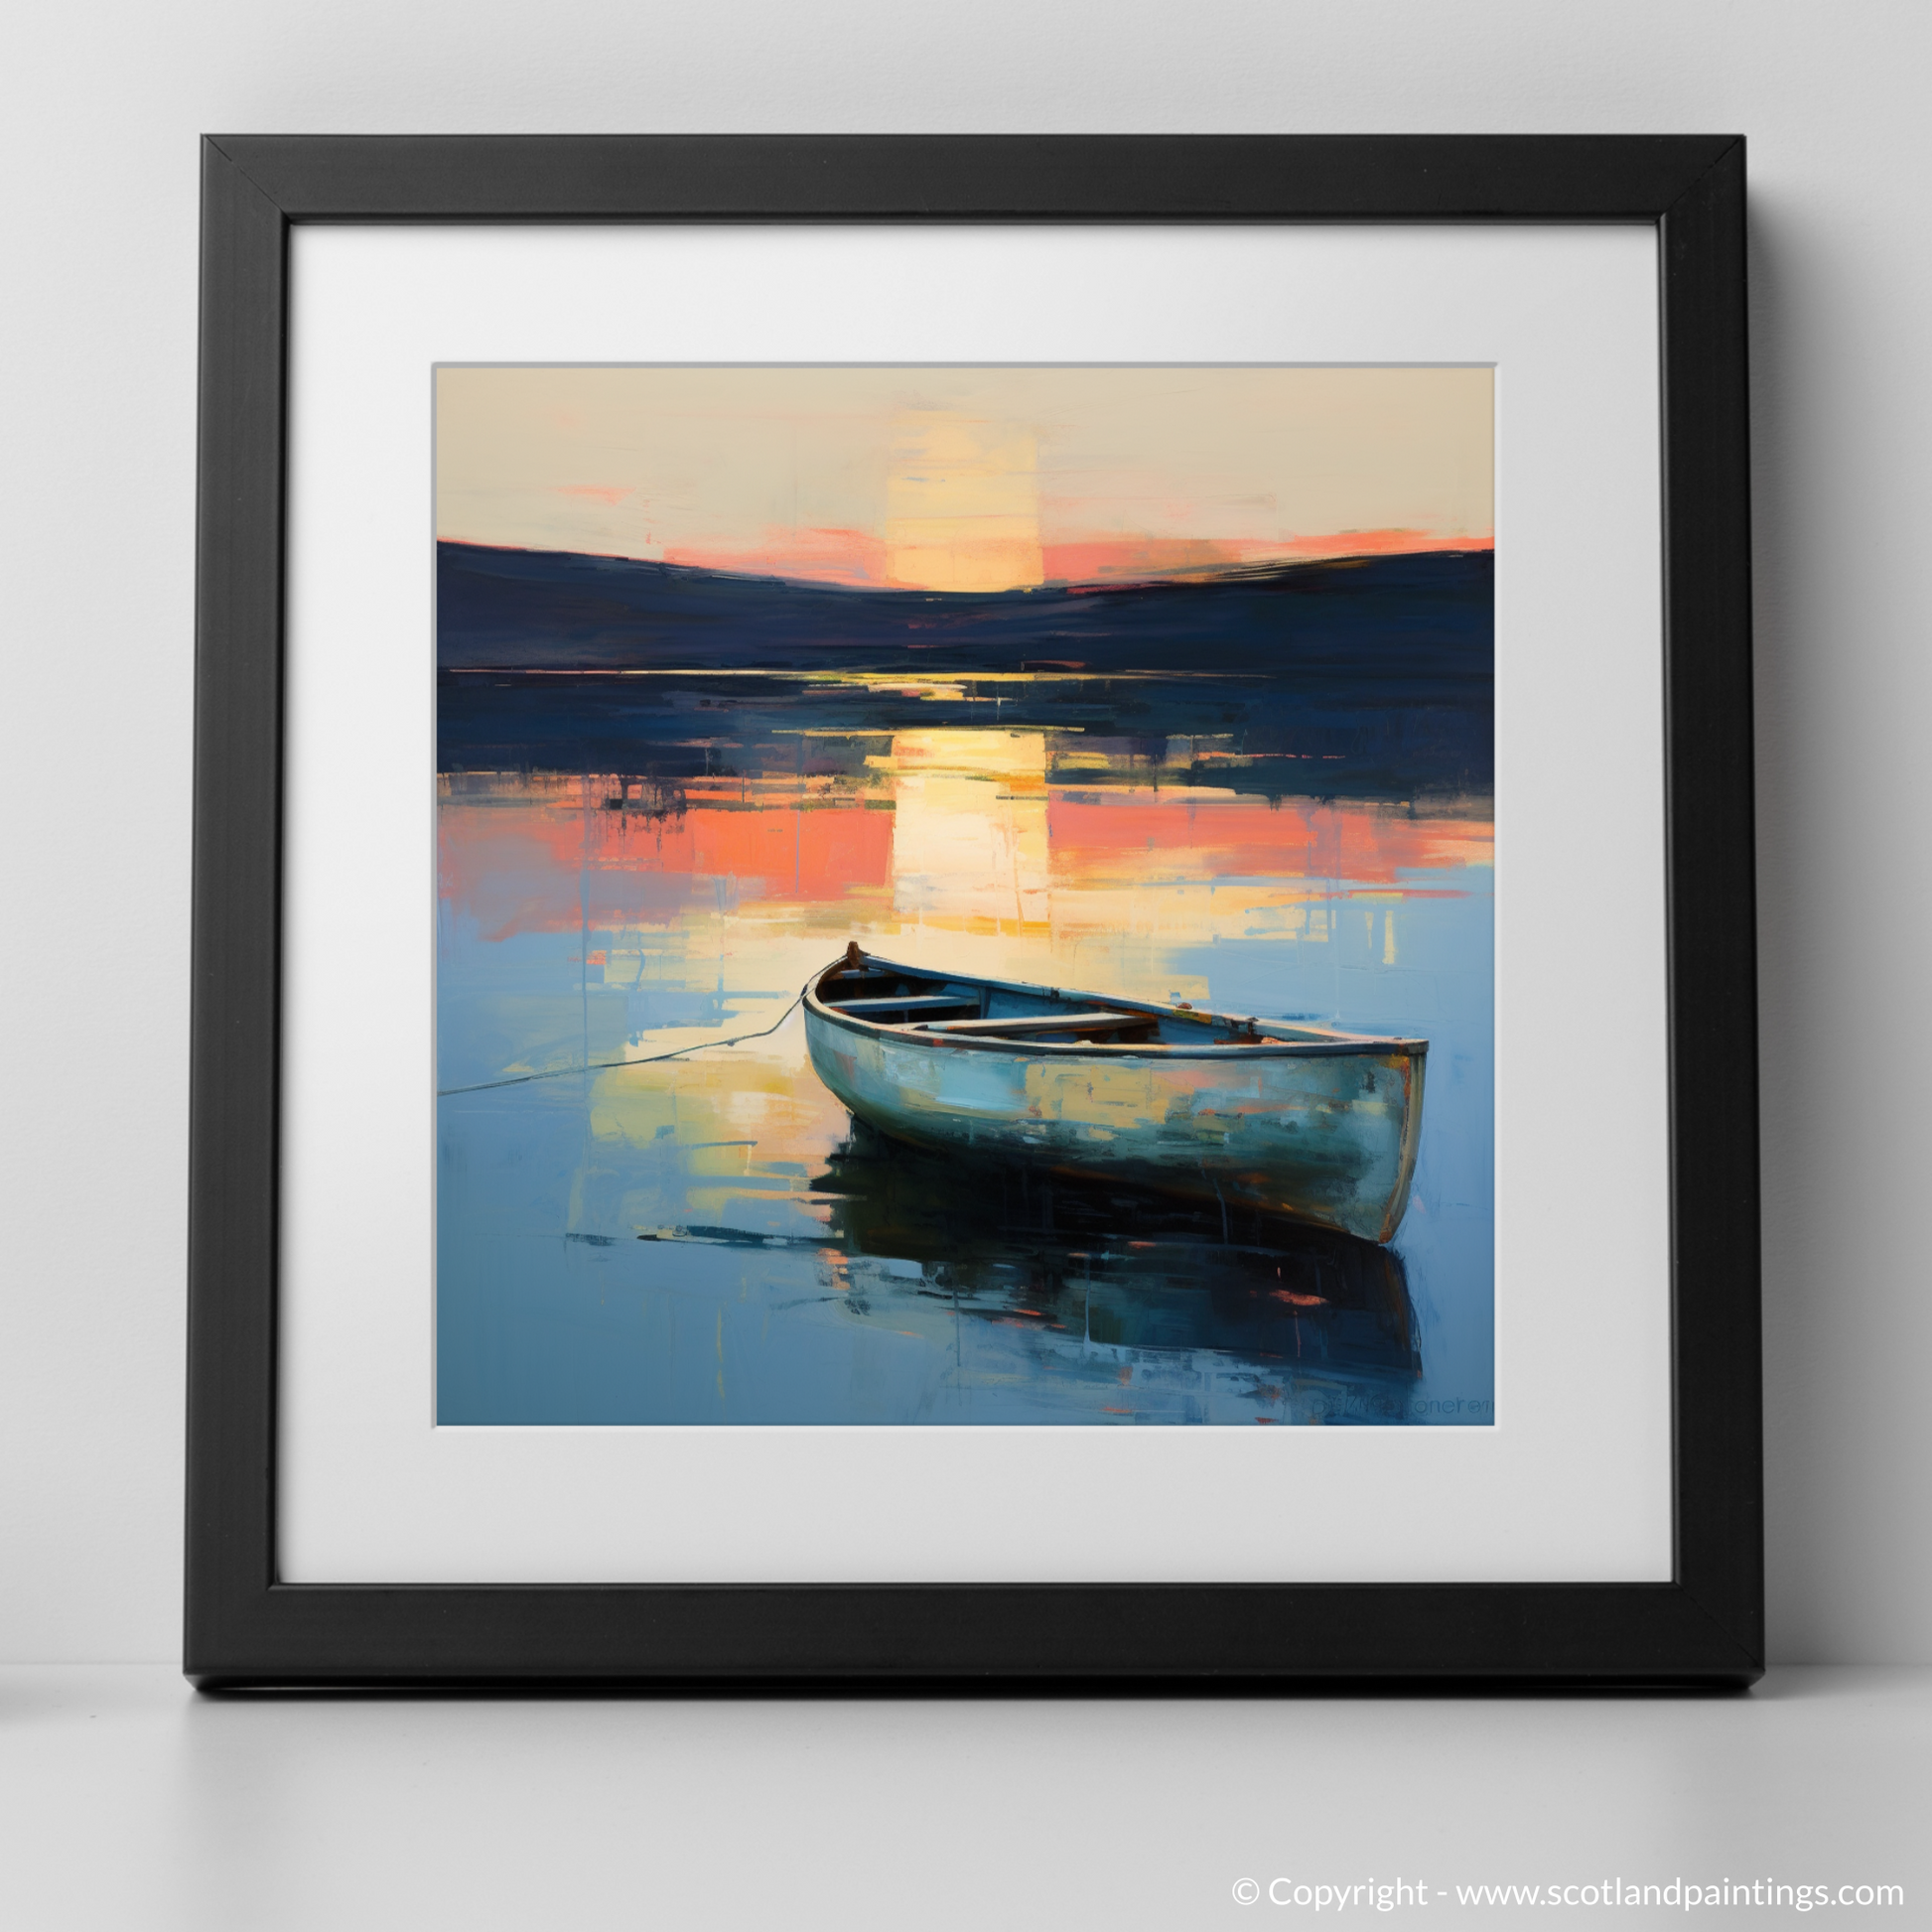 Art Print of Lone rowboat on Loch Lomond at dusk with a black frame